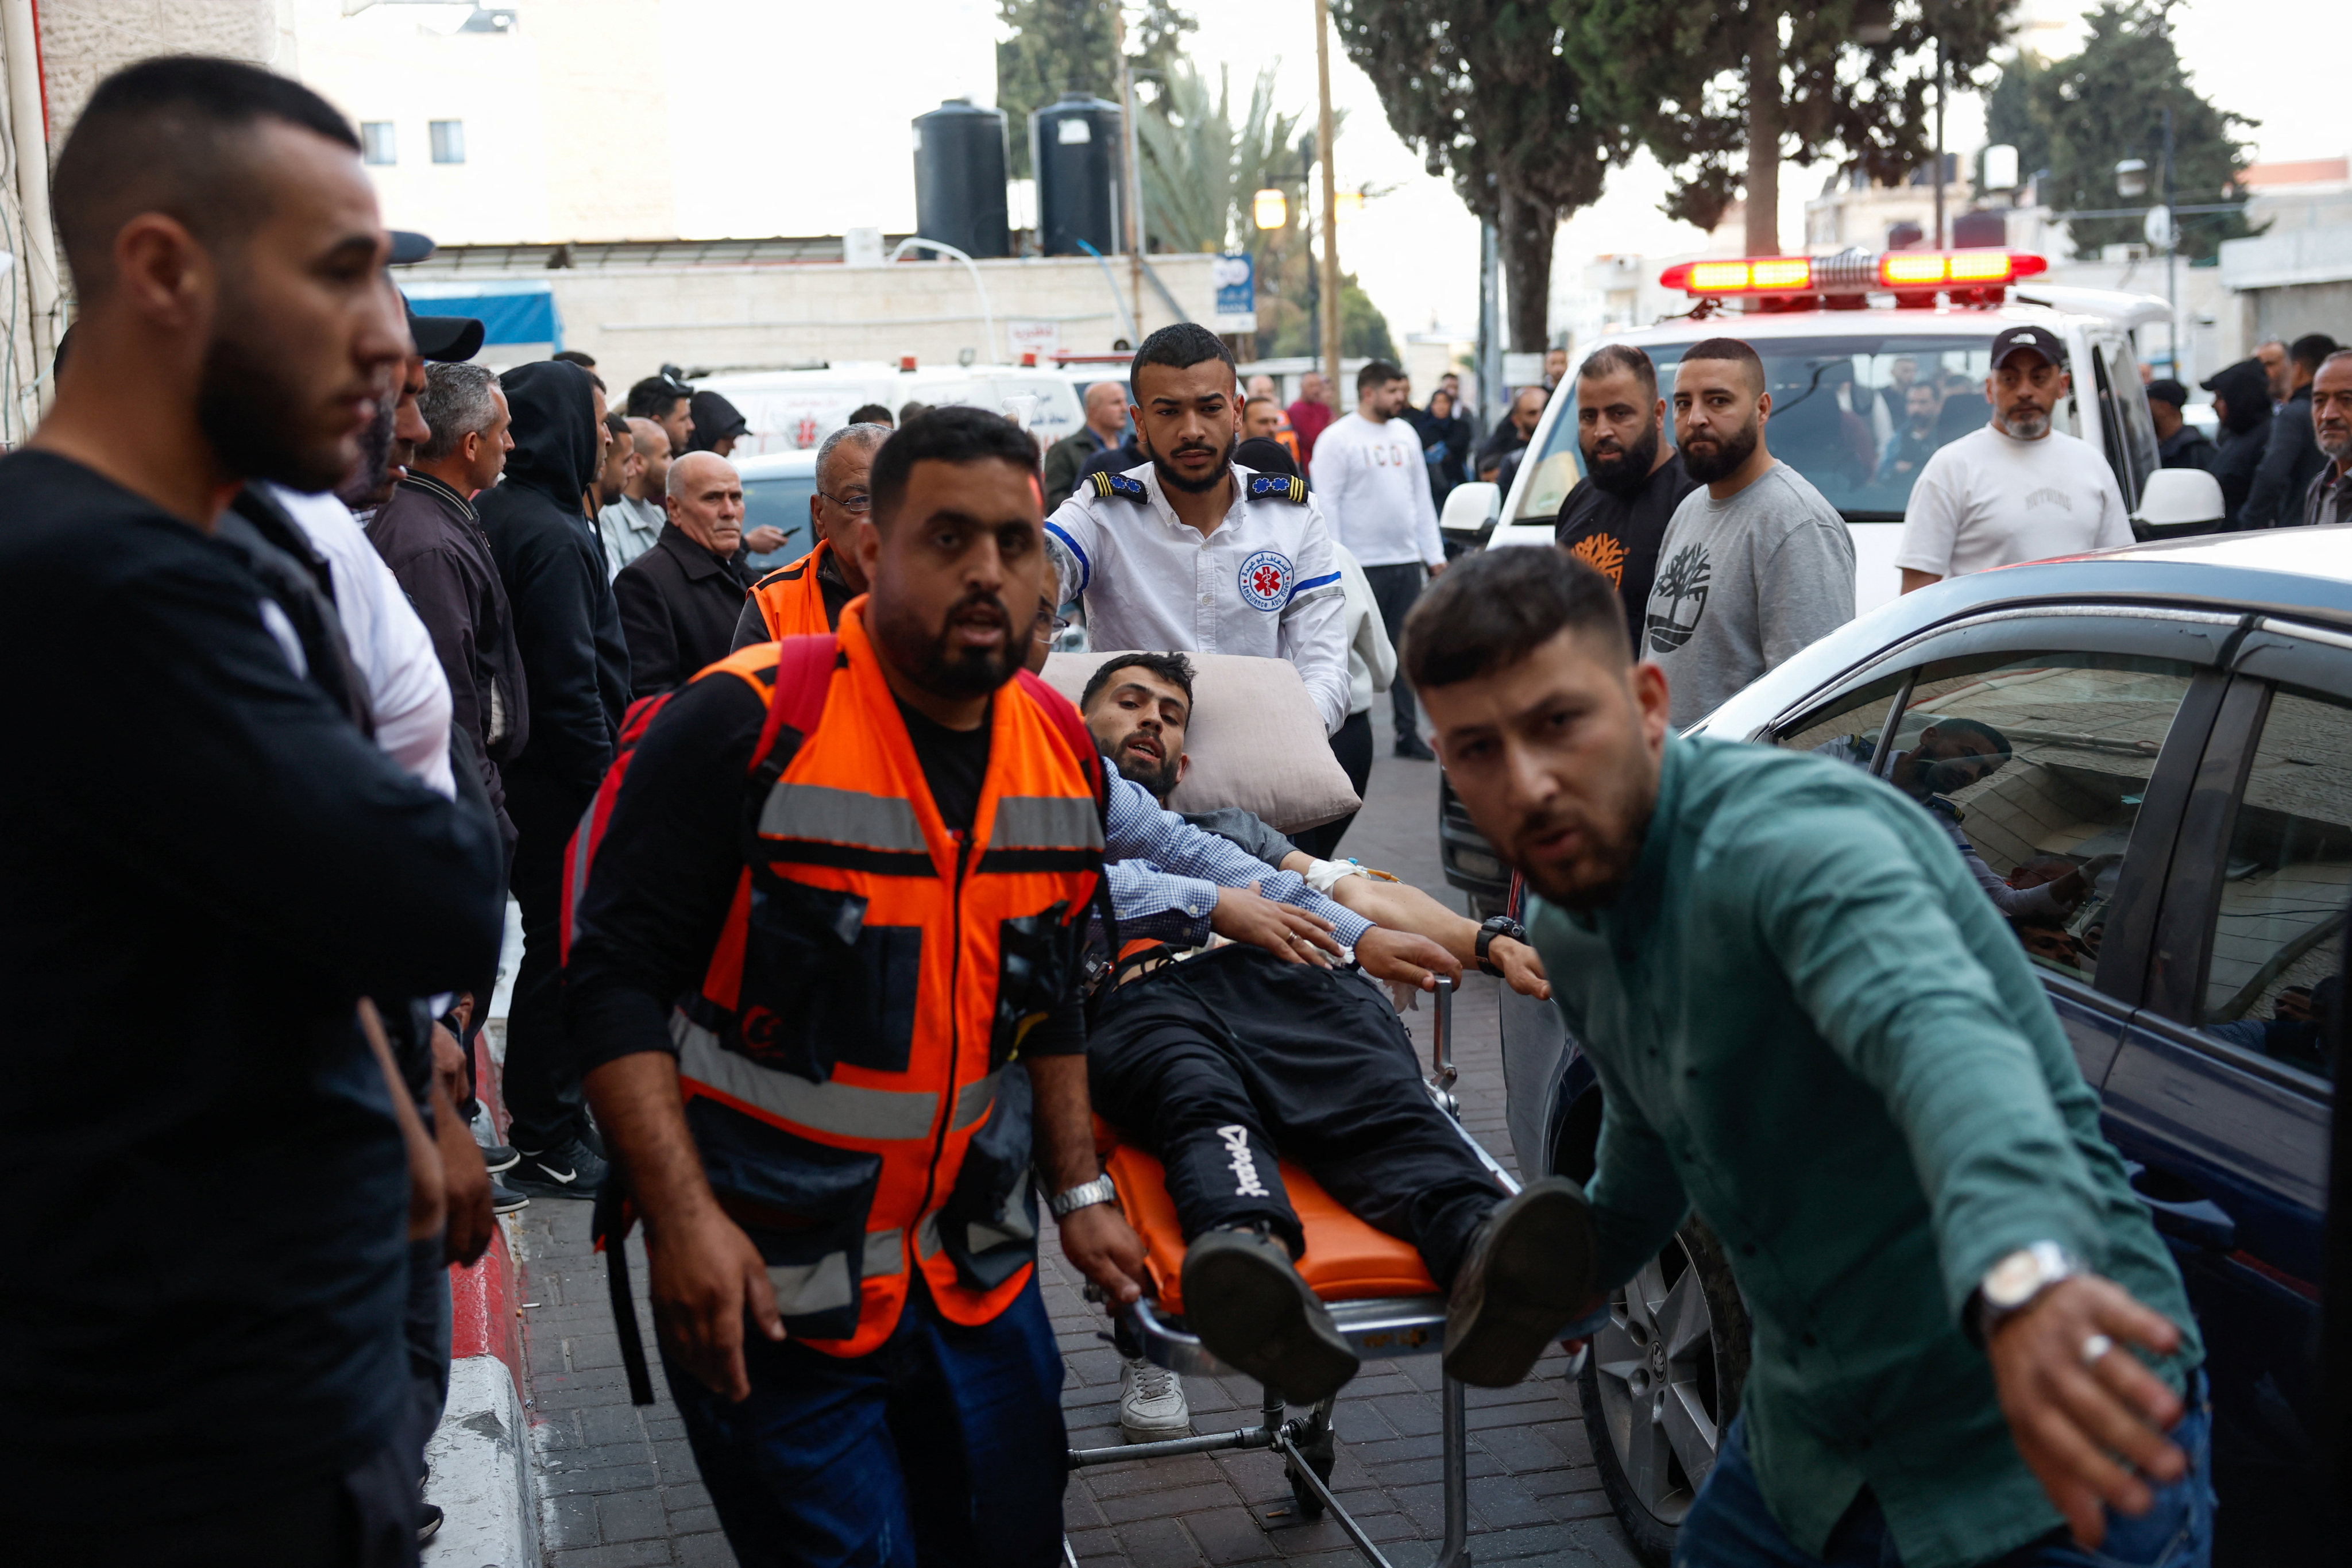 People transport a man wounded in an Israeli settler attack on the village of al-Mughayyir to a hospital in Ramallah, in the Israeli occupied West Bank, on Friday. Photo: Reuters